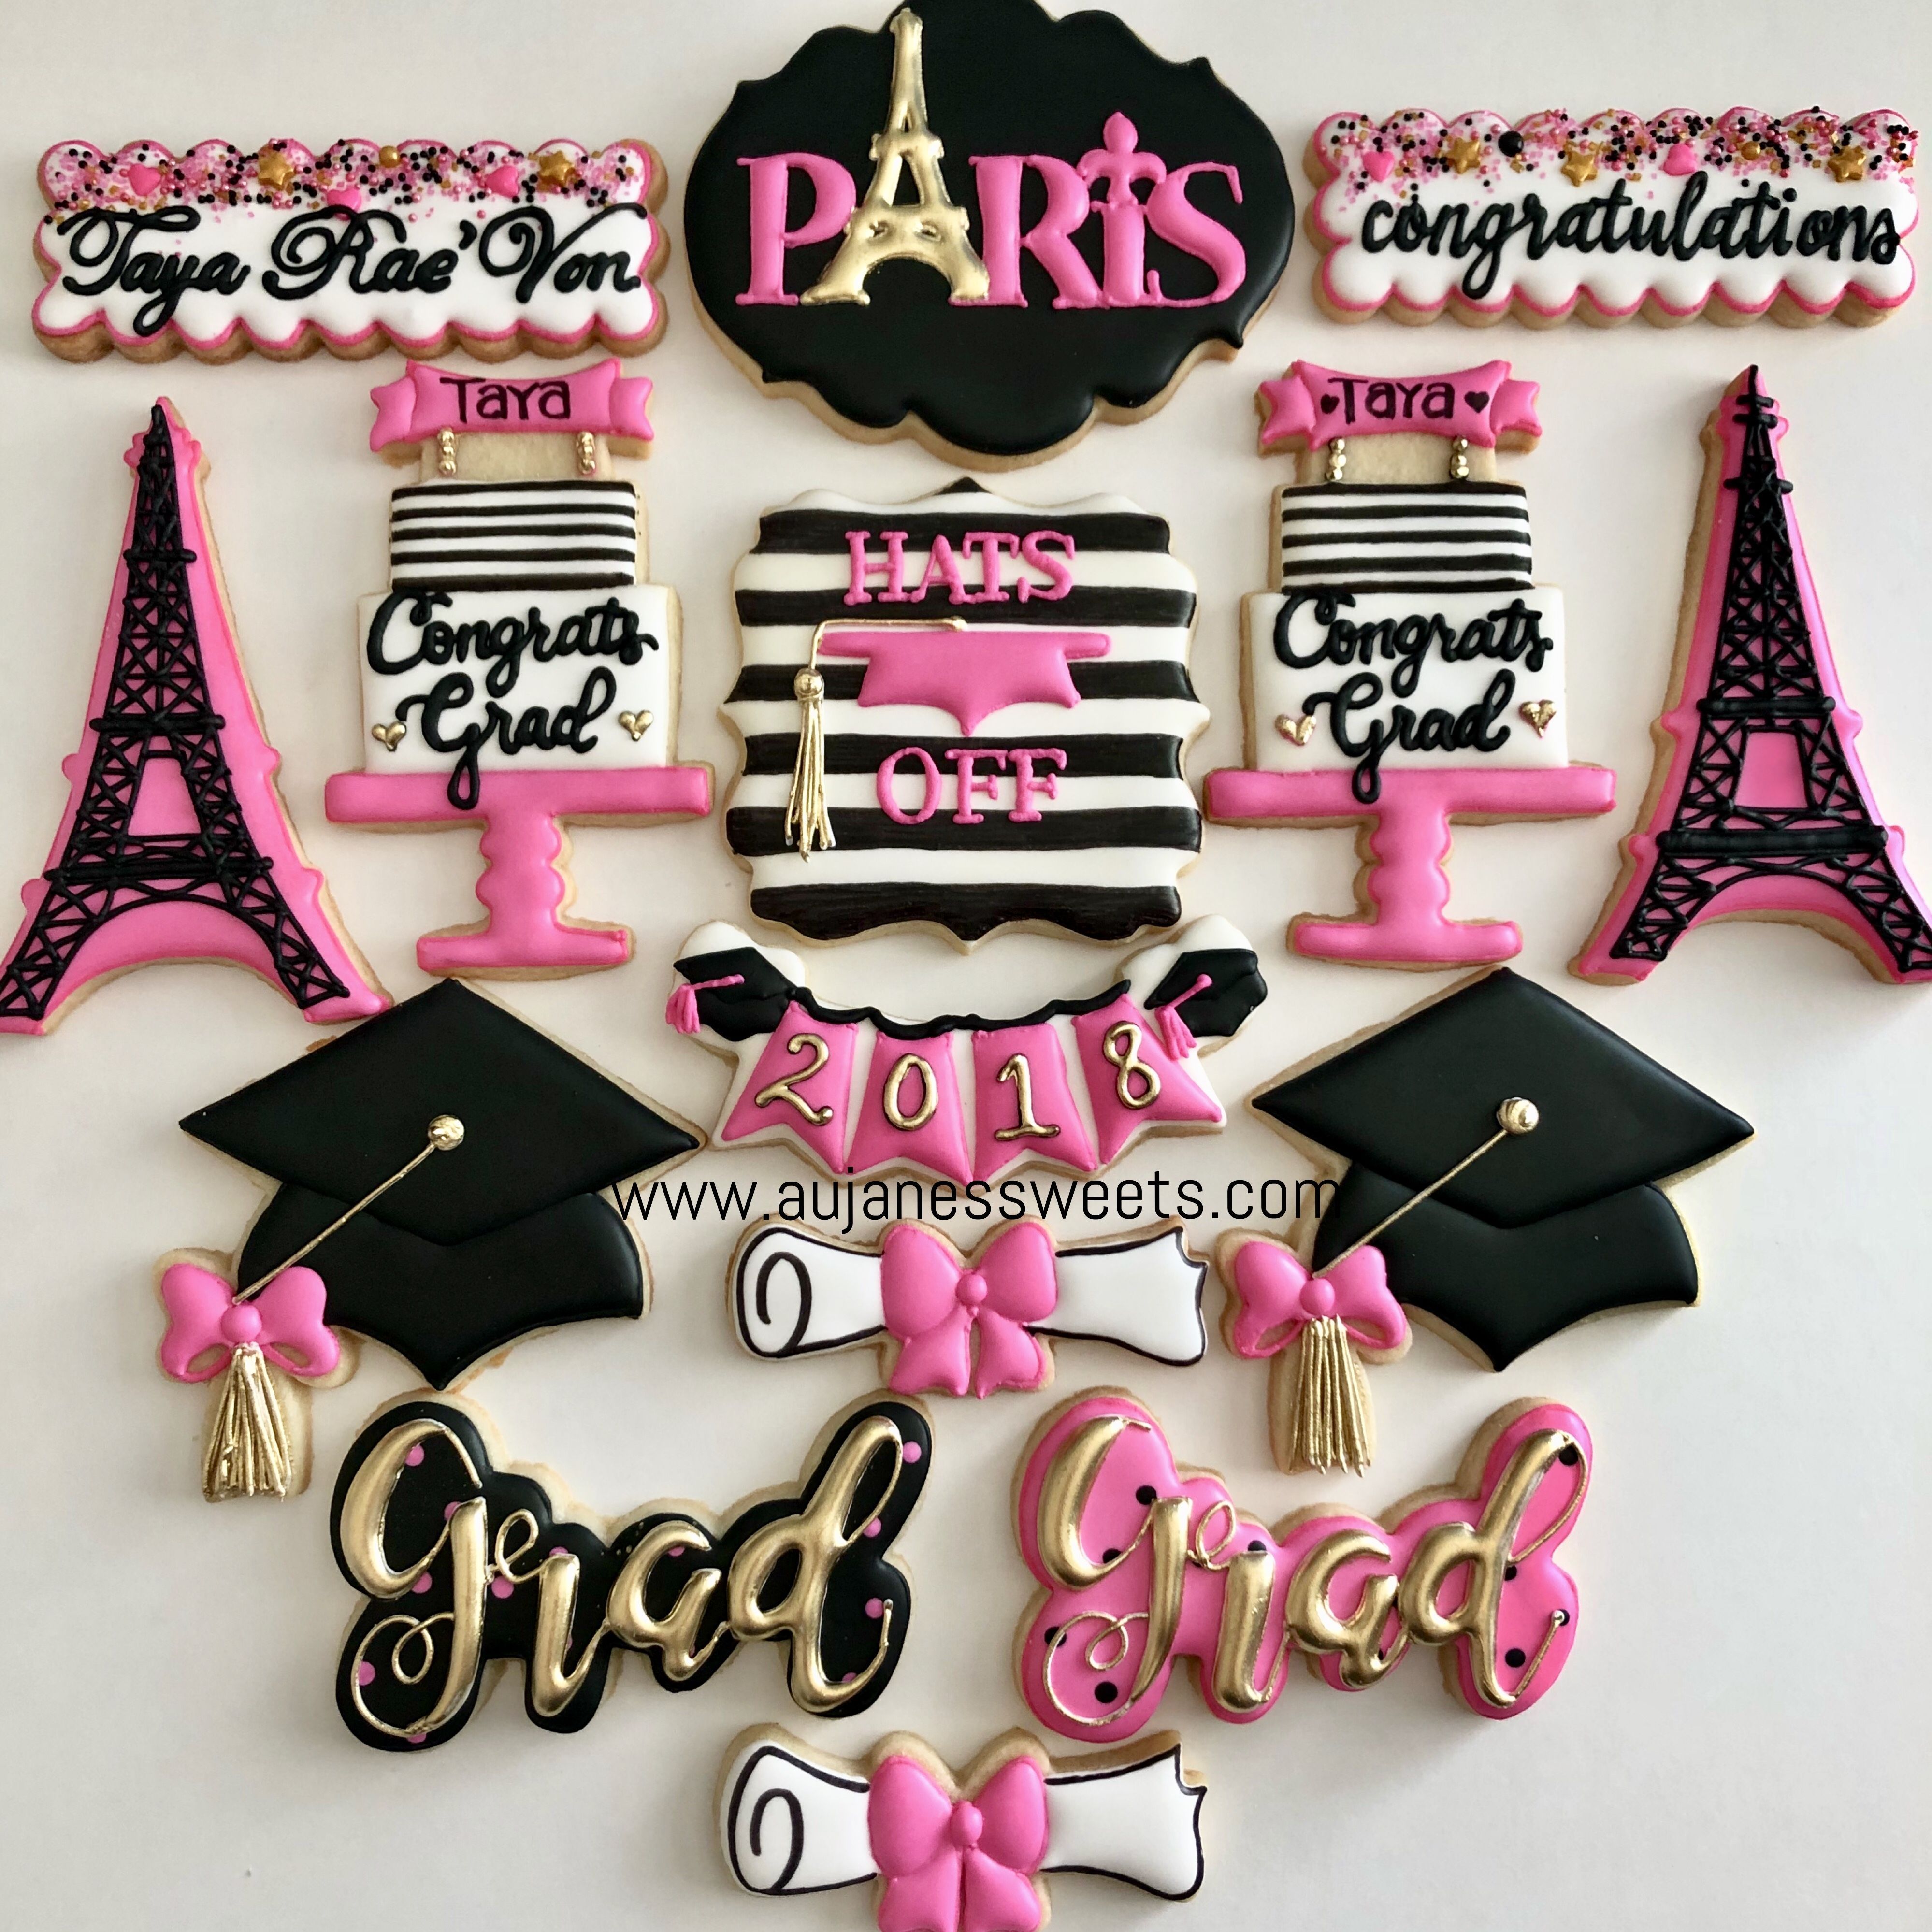 Cake and Cookie Supplies in League City, Texas -   21 girly decor cookies
 ideas